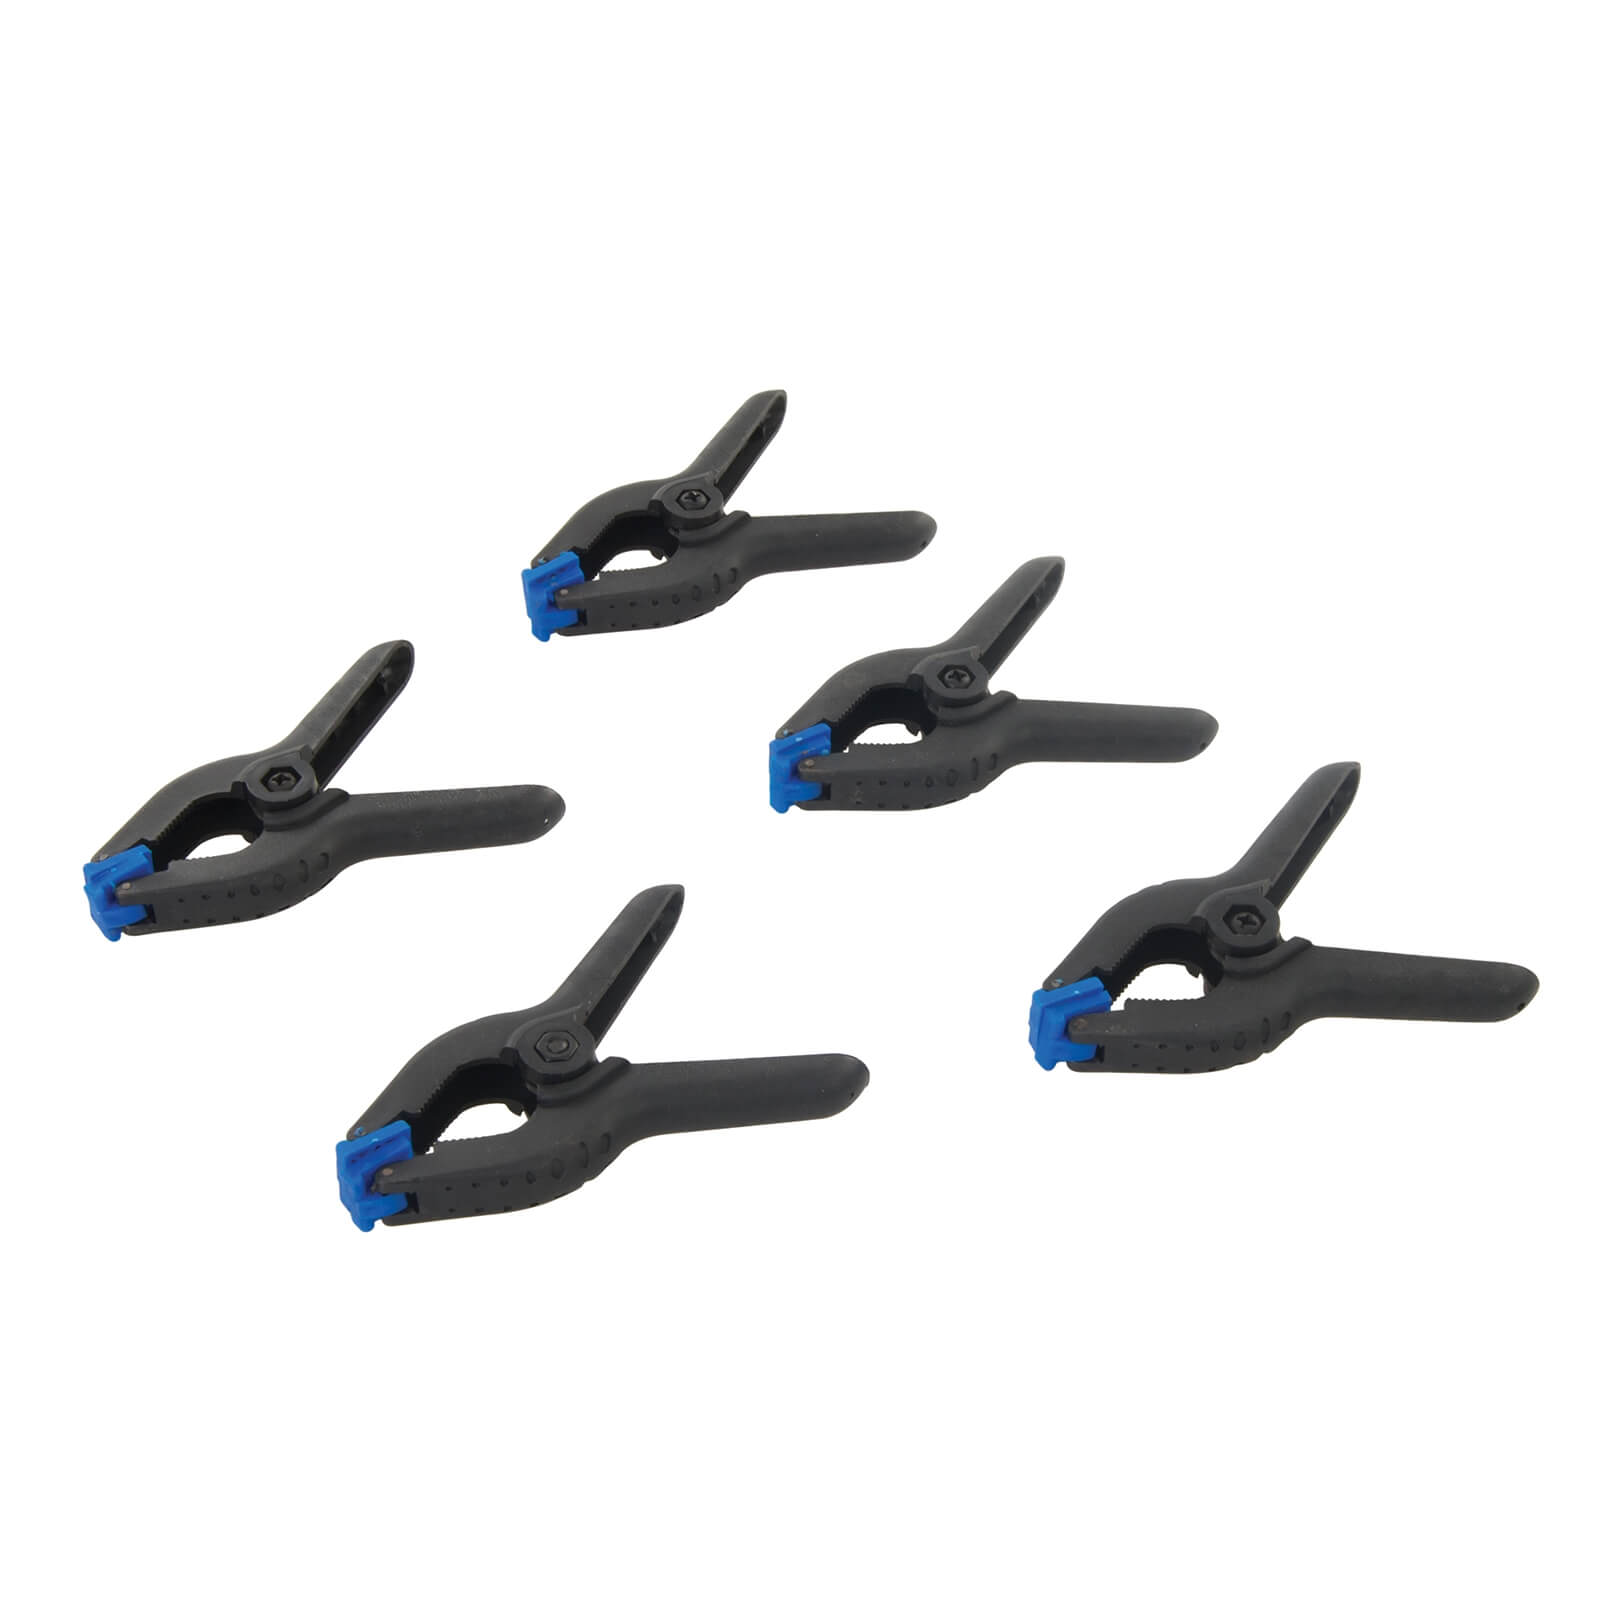 Pack of 5 Spring Clamps - 30mm Jaw